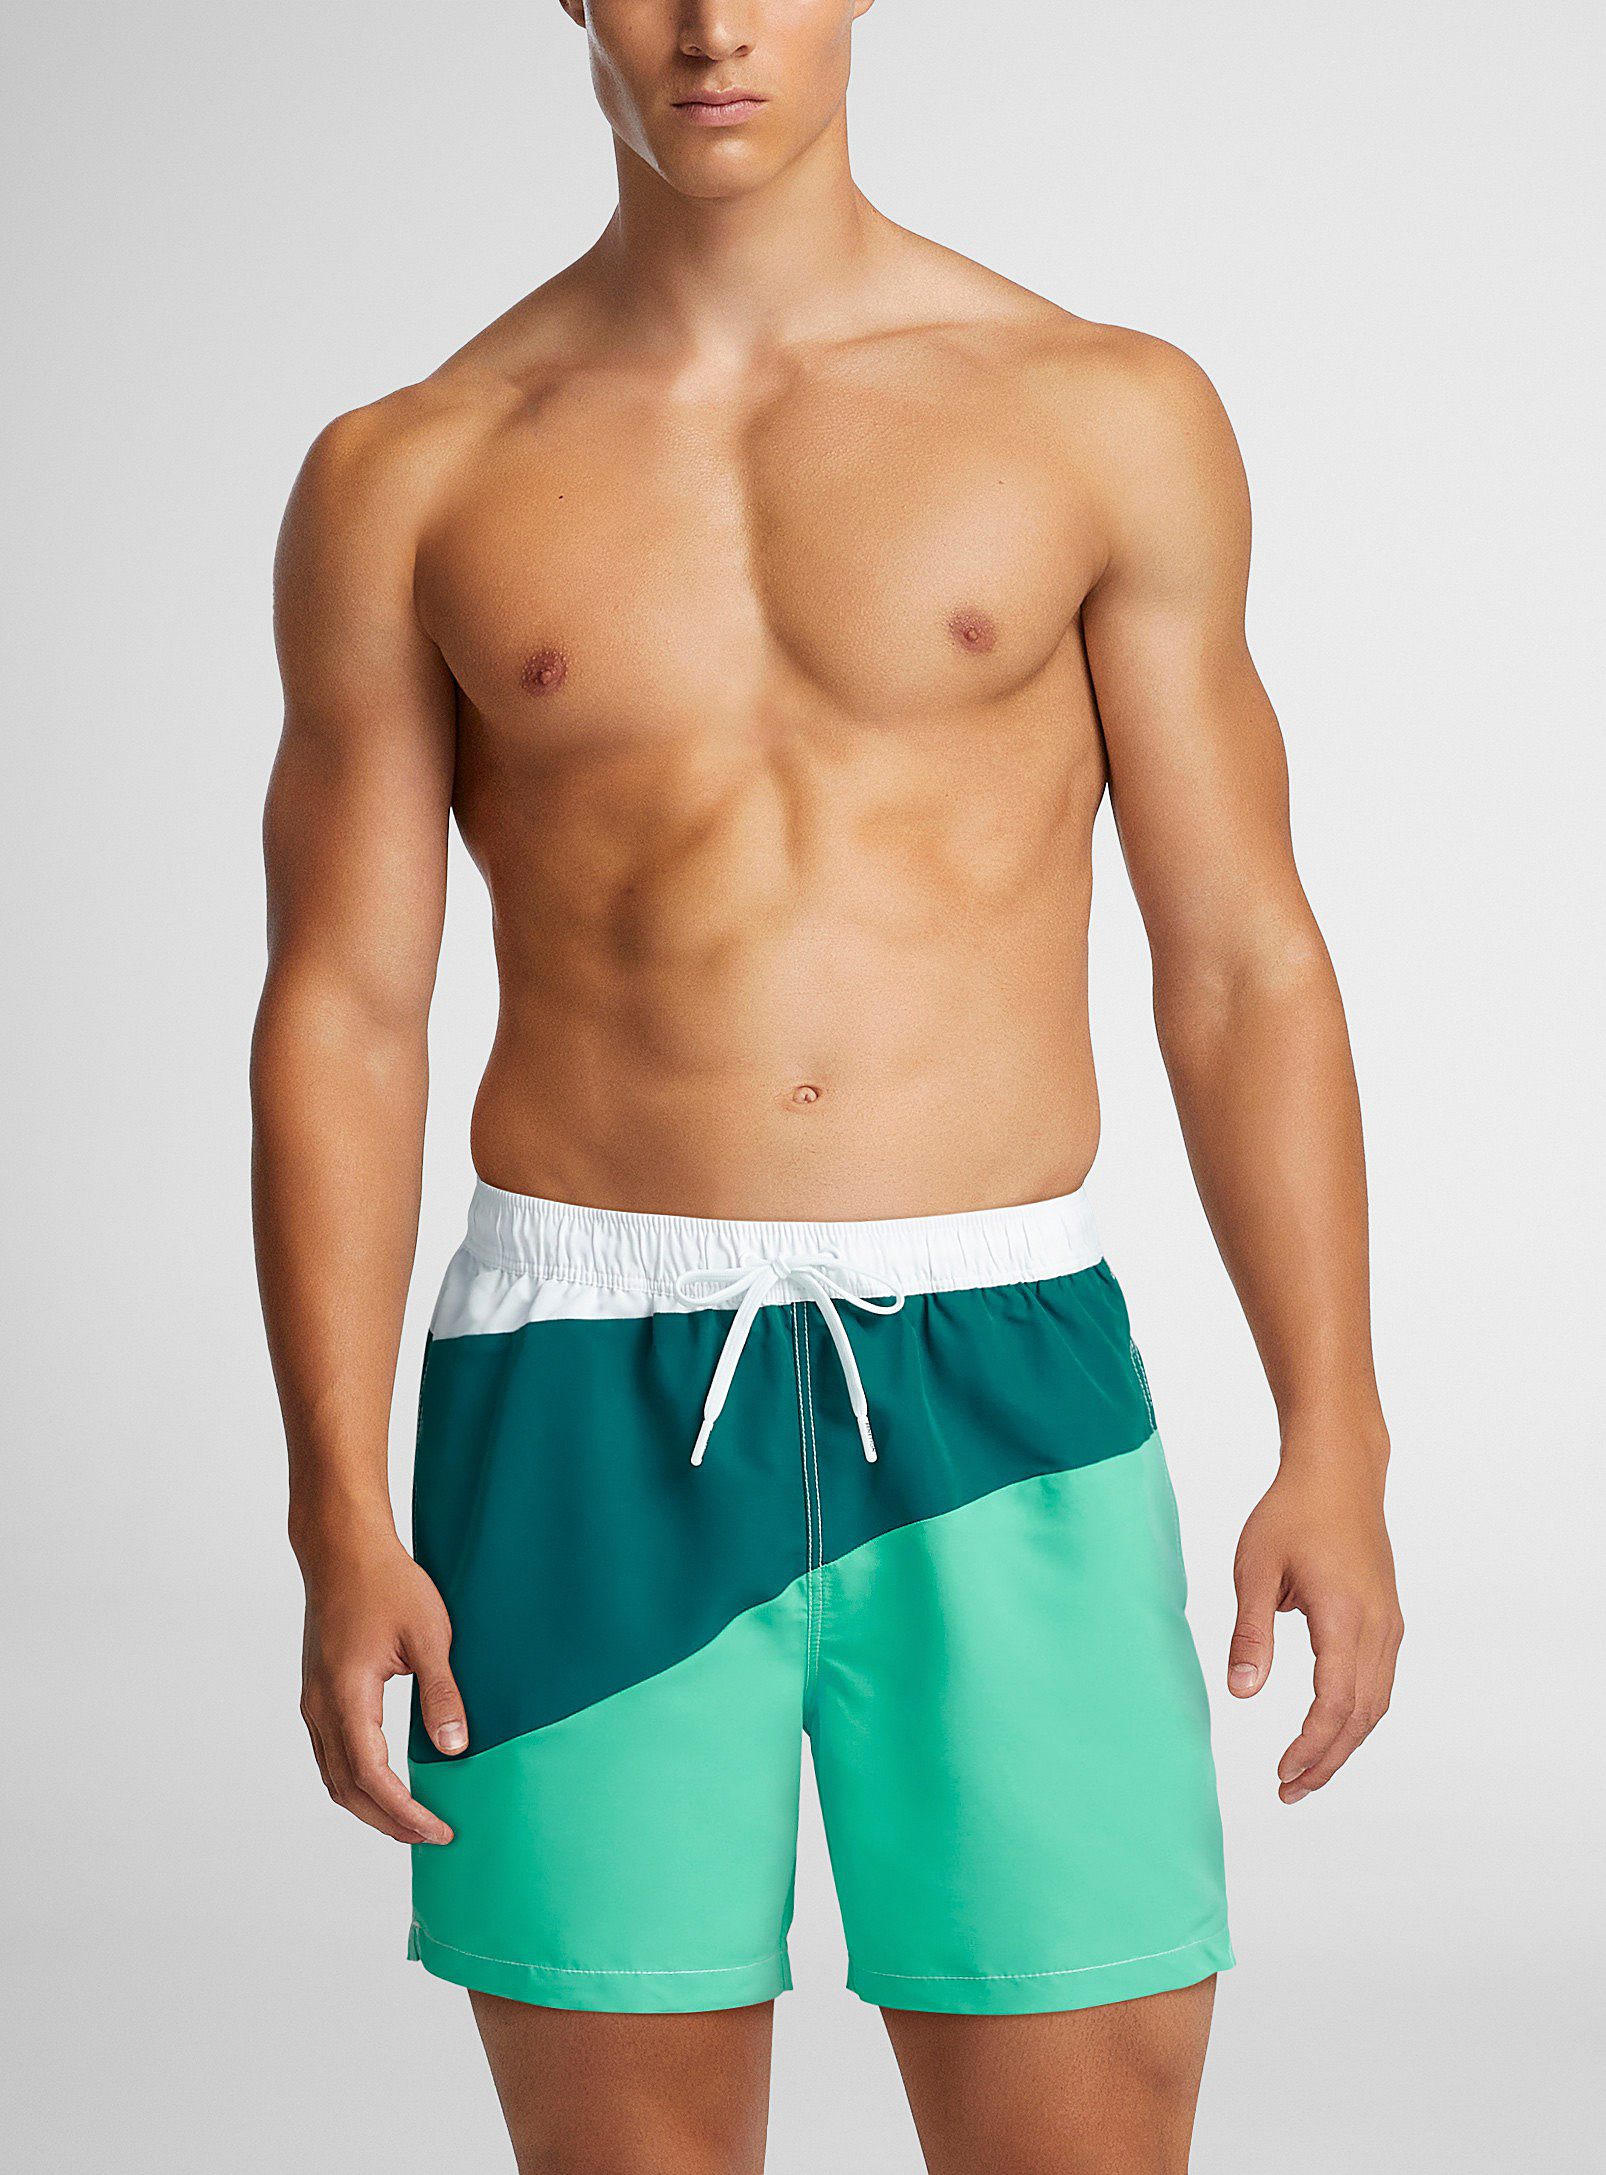 United Colors Of Benetton Tricolour Swim Trunk In Teal